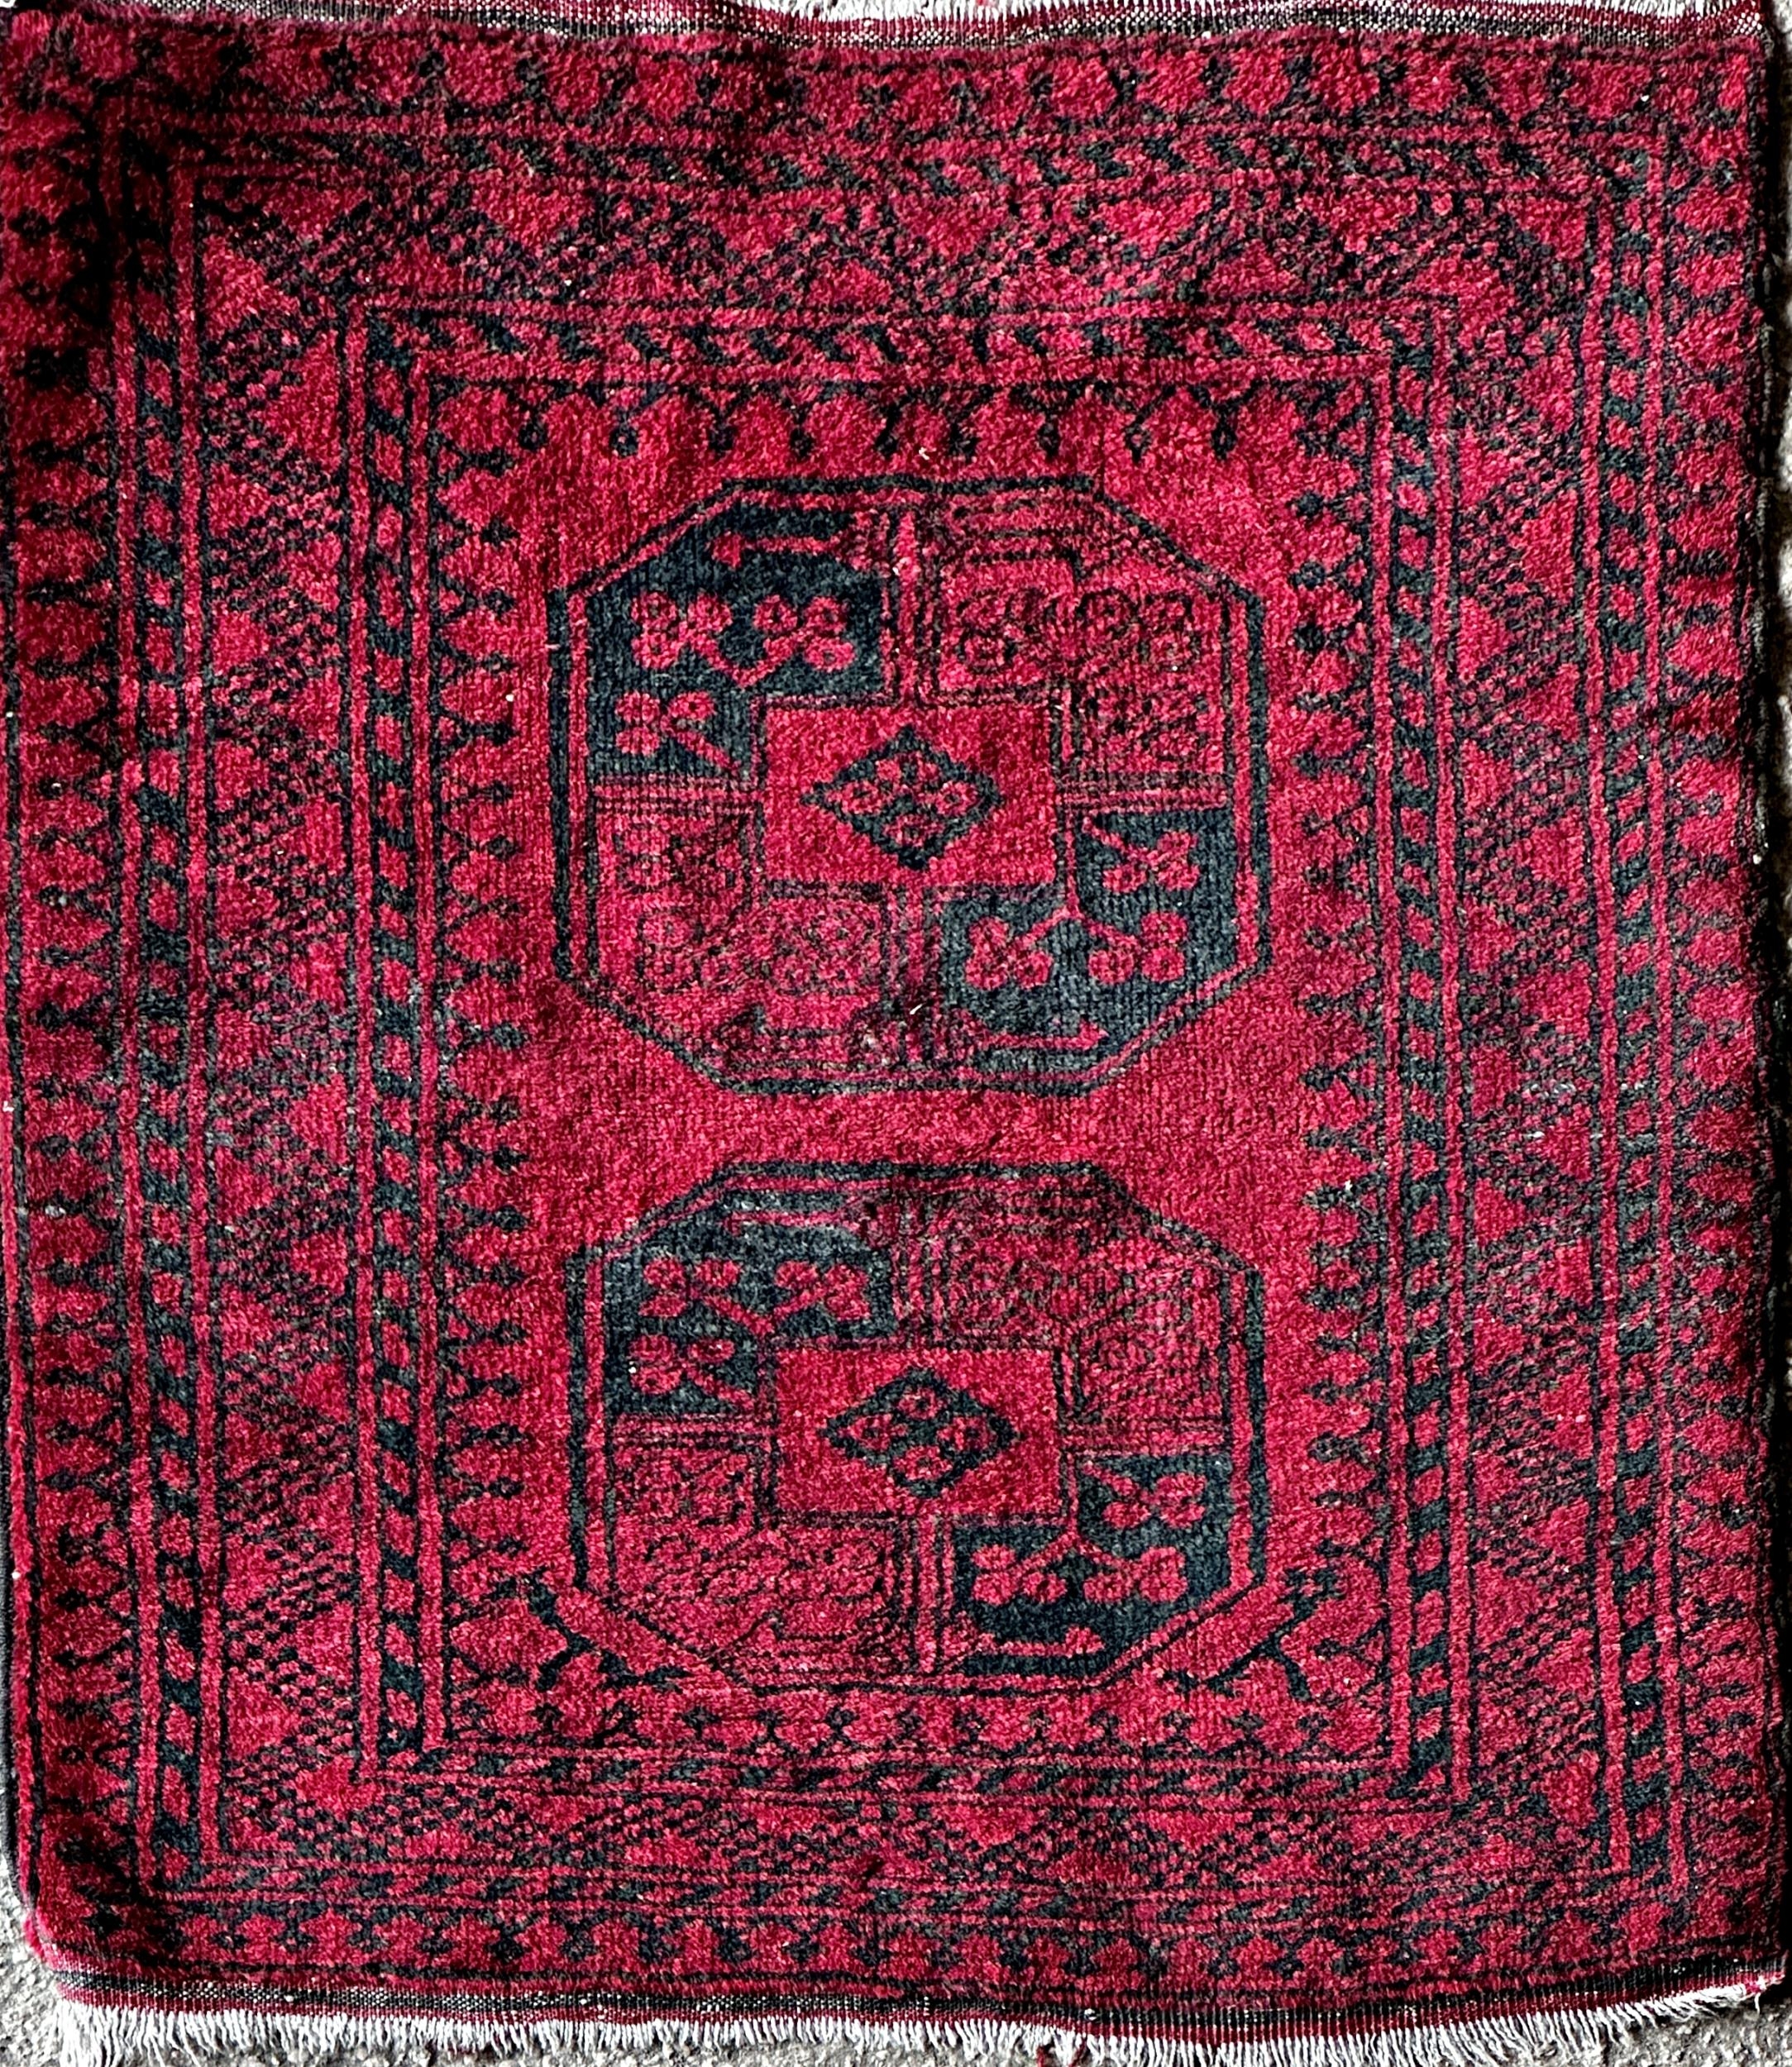 Full pile Bokhara rug, two black medallions on a red ground, 120 x 105cm